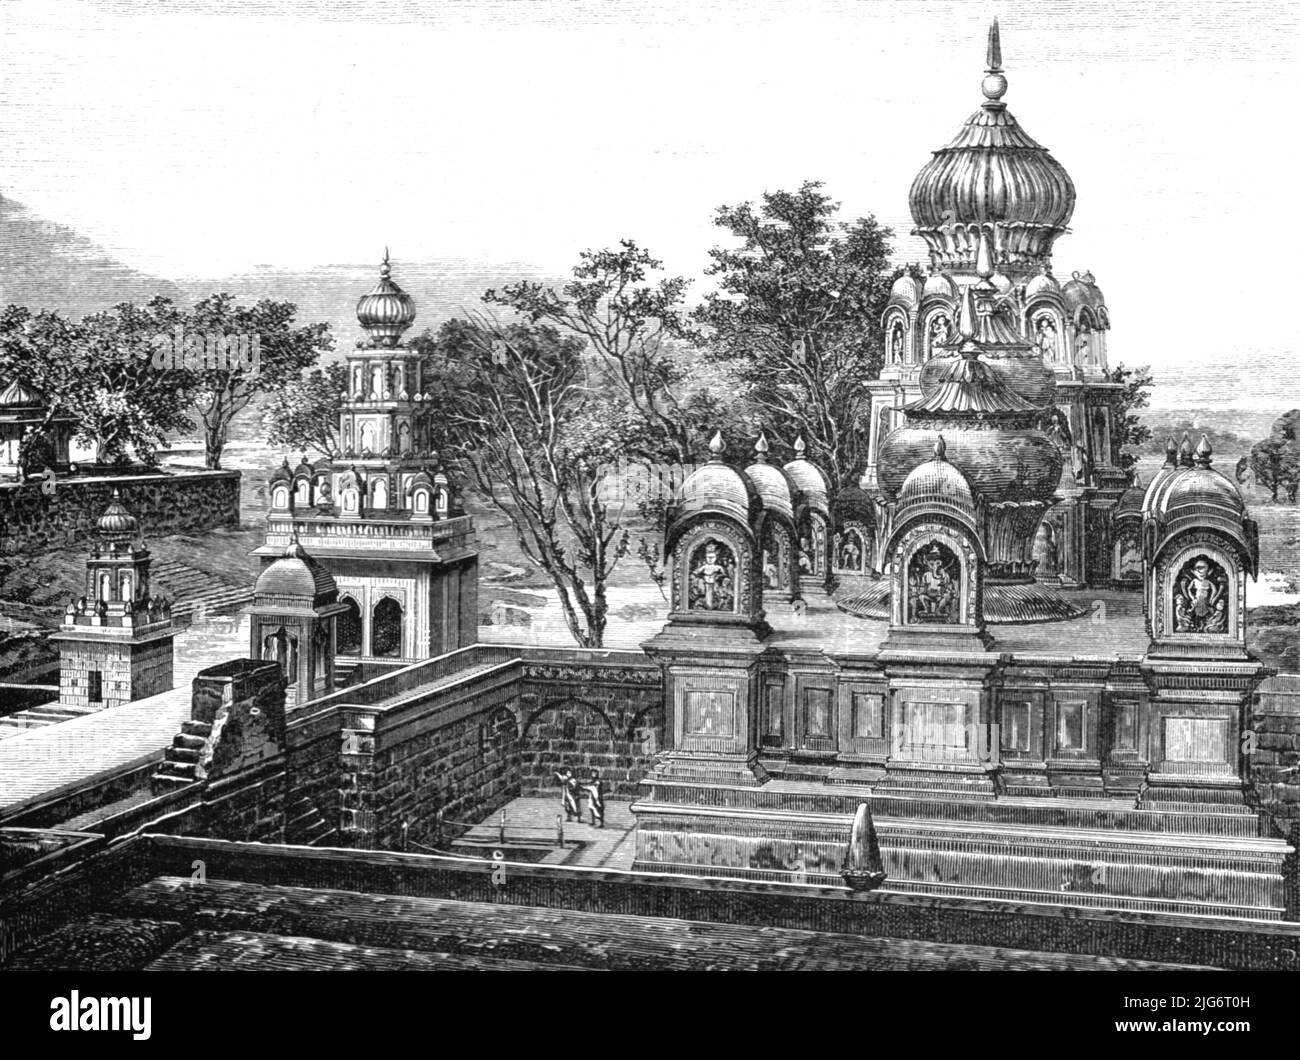 'Temple in Ceylon; Four Months in Ceylon', 1875. From, 'Illustrated Travels' by H.W. Bates. [Cassell, Petter, and Galpin, c1880, London] Belle Sauvage Works.London E.C. Stock Photo